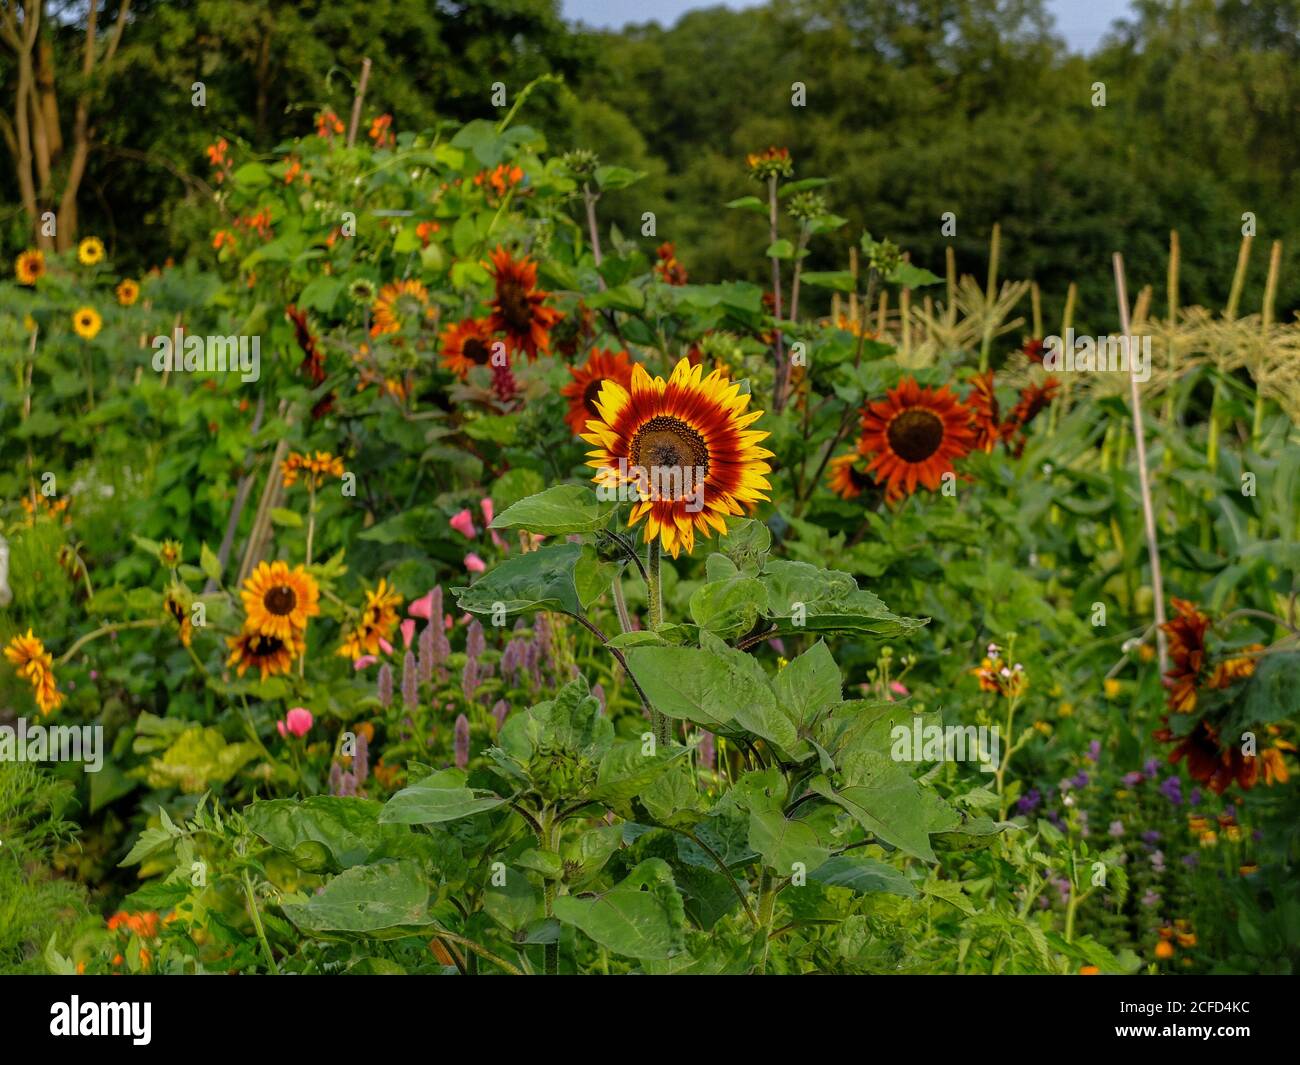 Late summer garden with various sunflowers (Helianthus annuus) Stock Photo